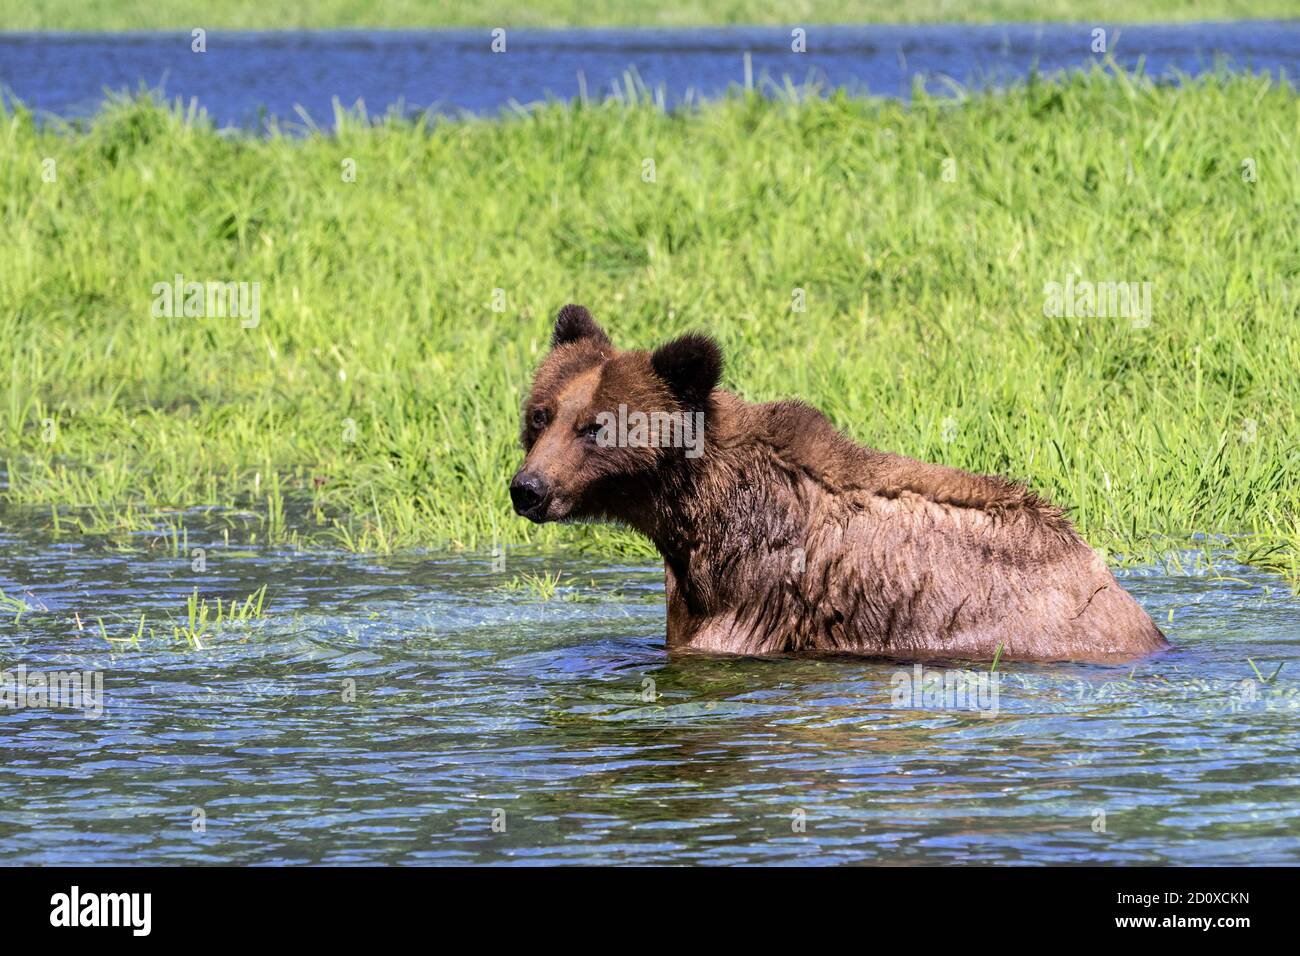 Young grizzly bear in the water by a patch of sedge grass, Khutzeymateen, BC Stock Photo